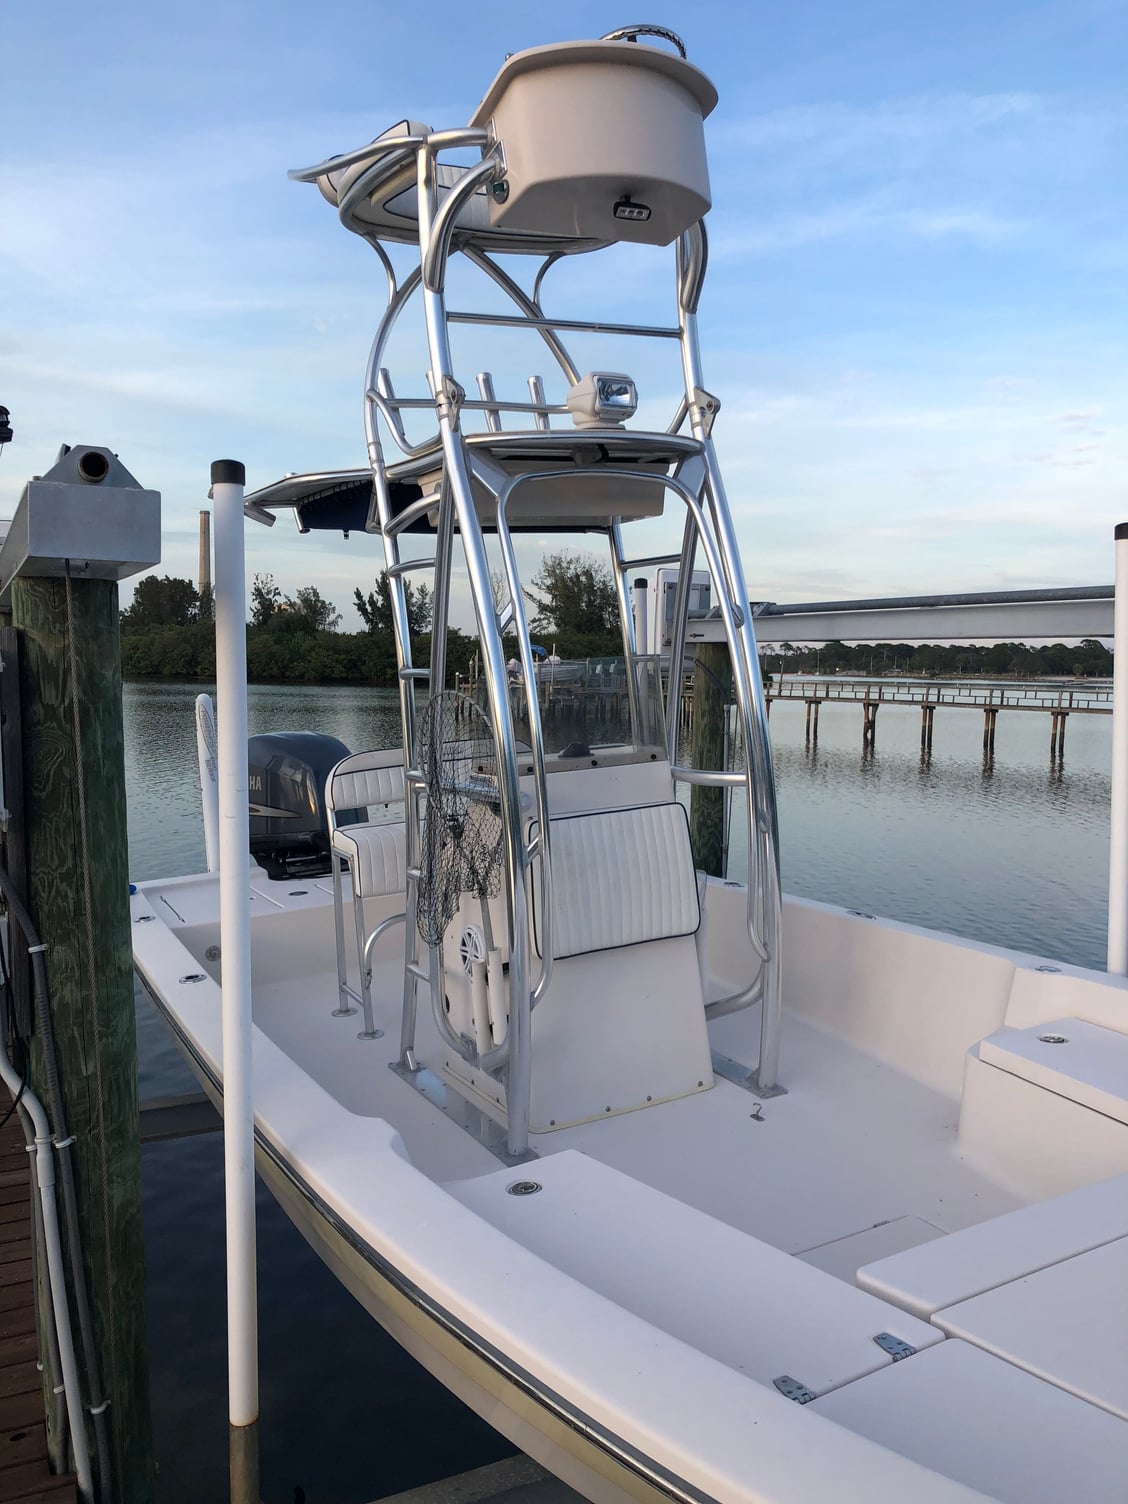 Sold! 2007 24’ Pathfinder Tournament $44,999 - The Hull Truth - Boating ...